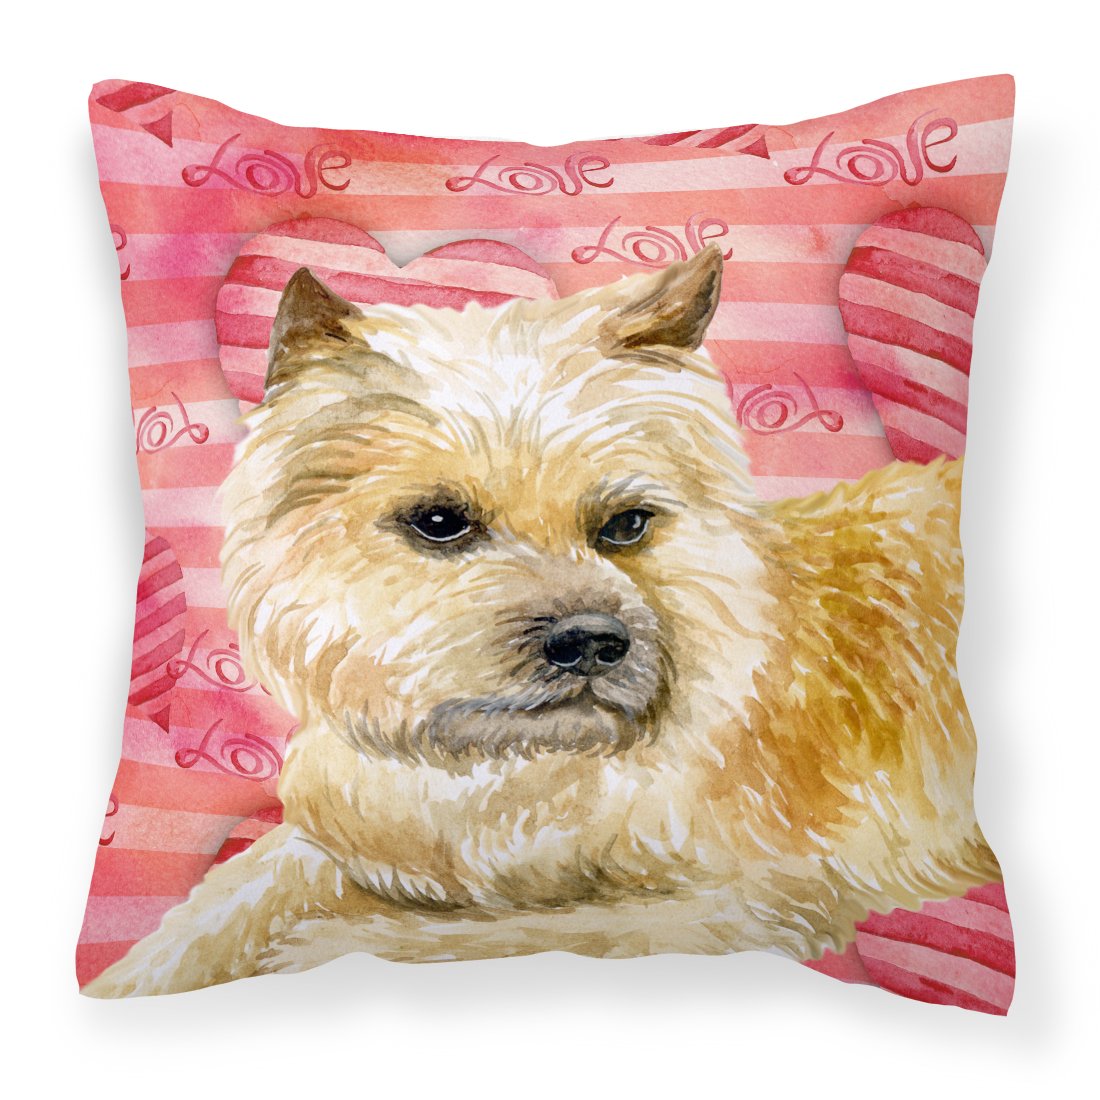 Cairn Terrier Love Fabric Decorative Pillow BB9777PW1818 by Caroline's Treasures